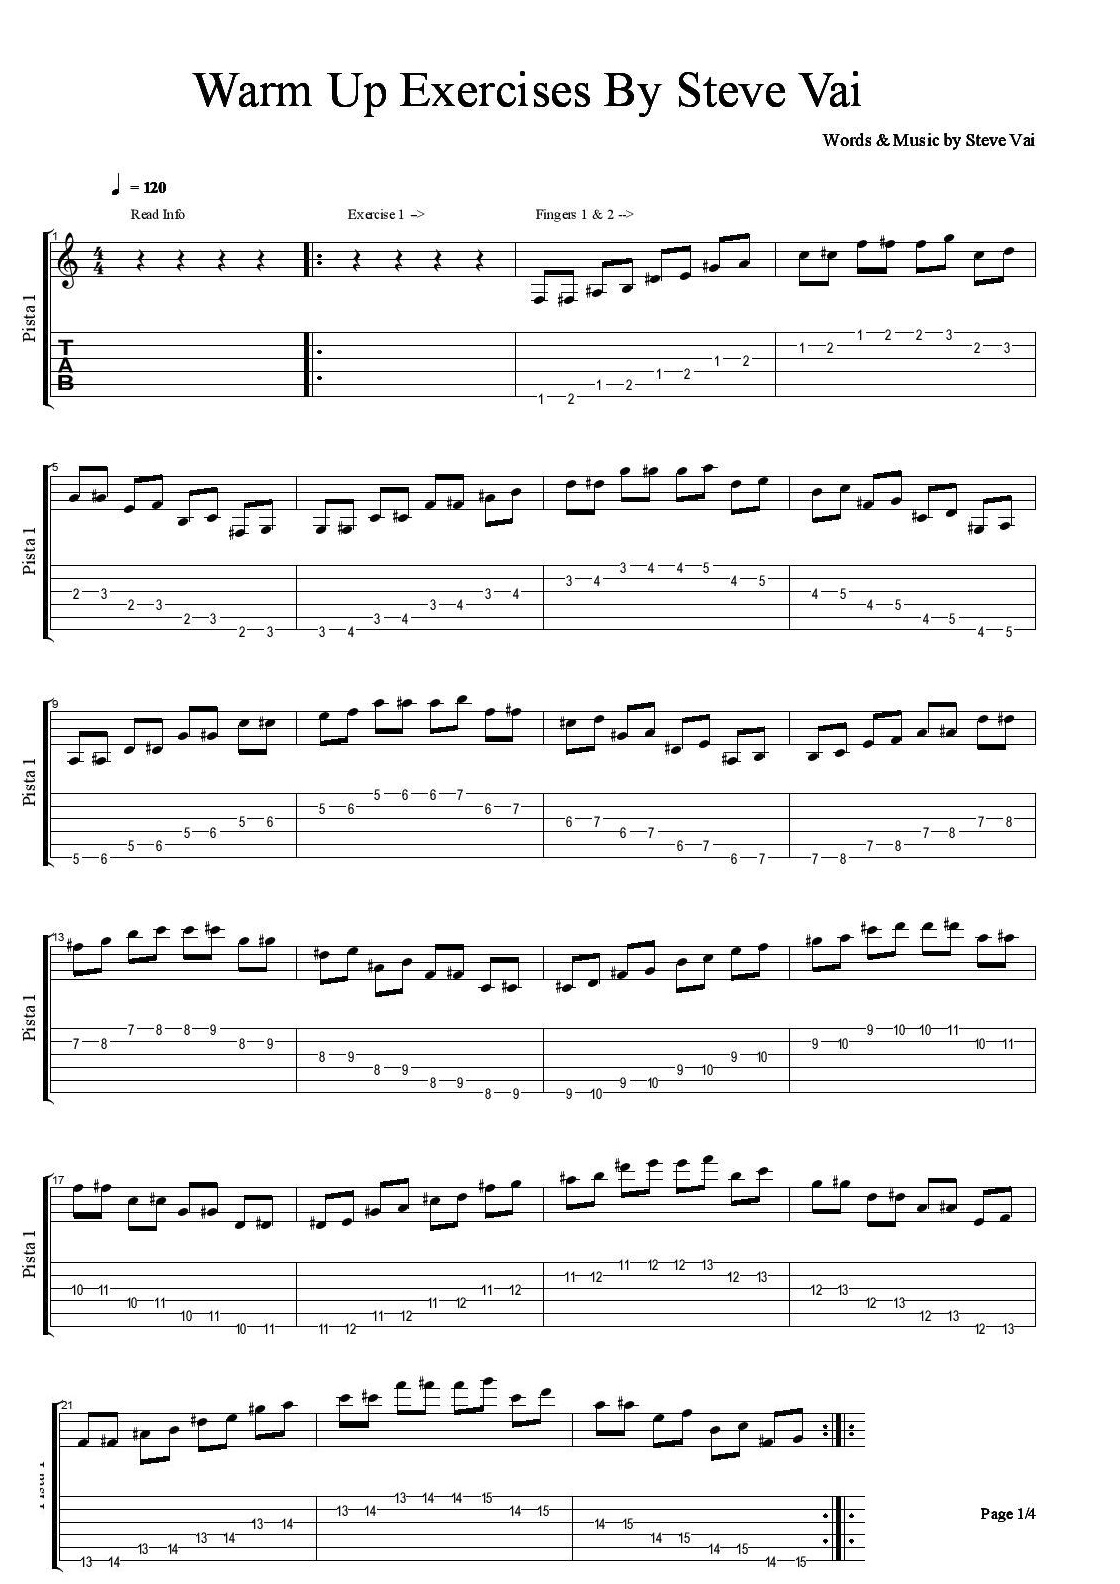 Guitar Pro   Warm Up Exercises   Warm Up Exercises By Bright_Eyes v1 page 001 apprendre la guitare